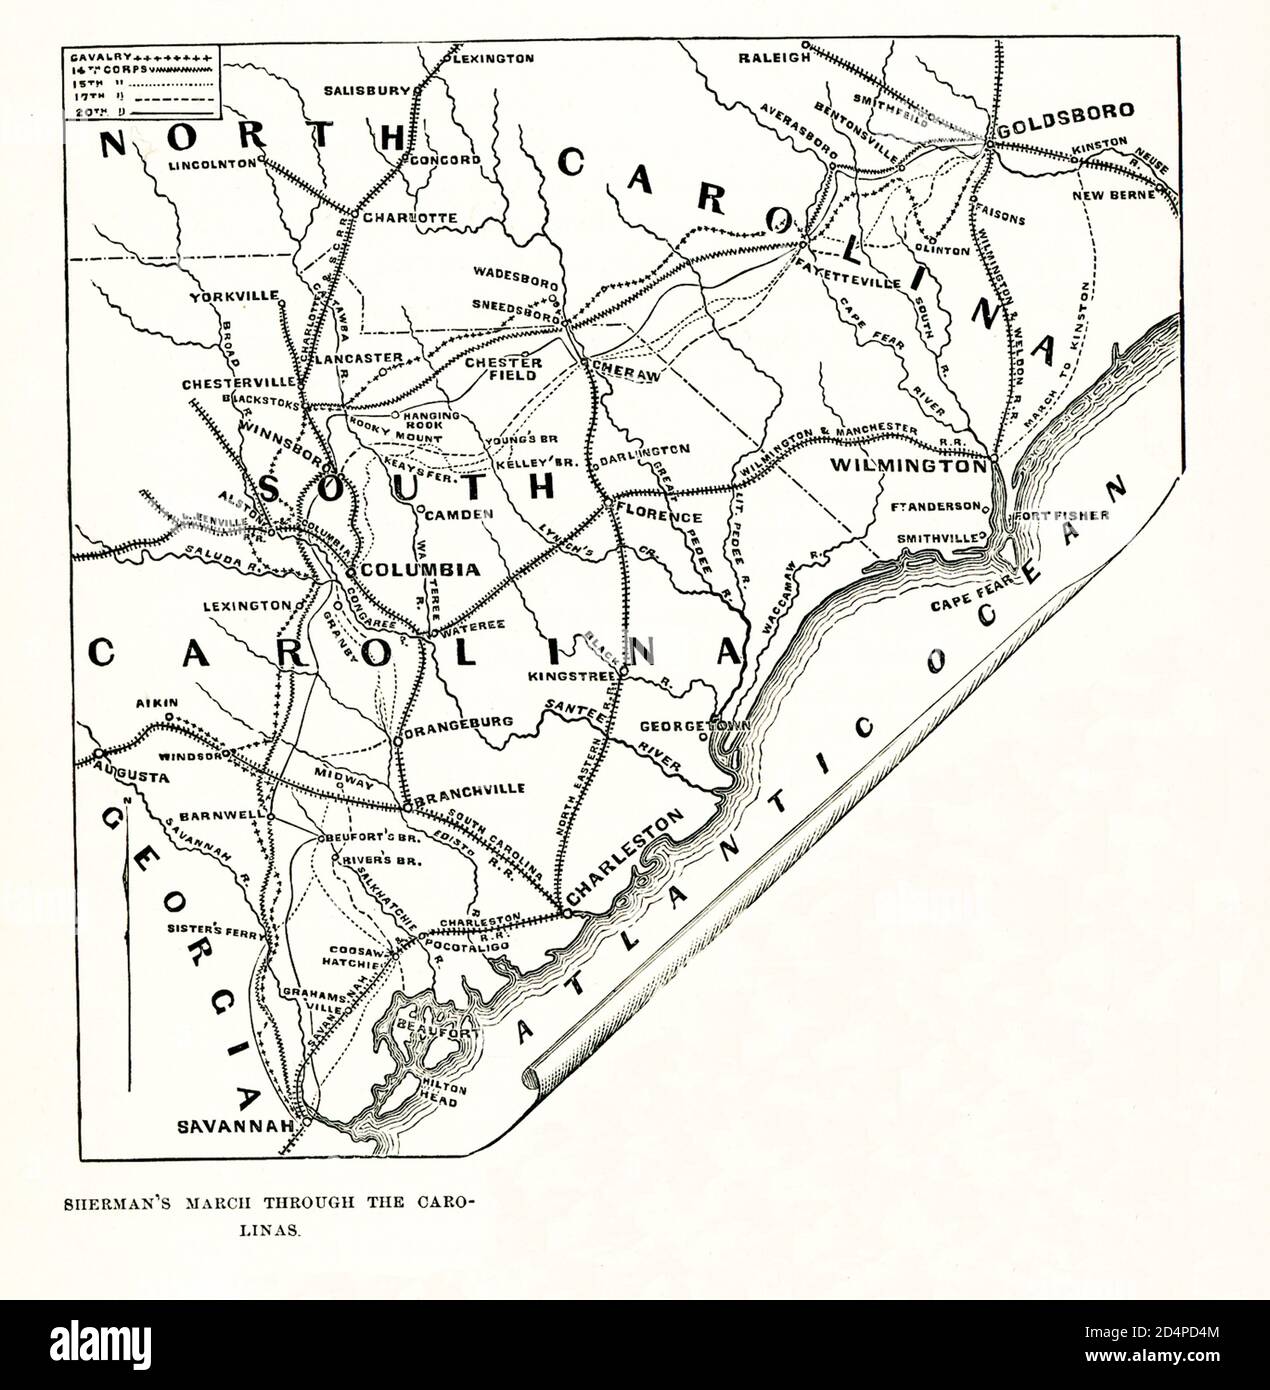 Sherman’s March Through Carolinas. This map shows: The Campaign of the Carolinas (January 1 – April 26, 1865)—the Carolinas Campaign—was the final campaign conducted by the Union Army against the Confederate States Army in the Western Theater. On January 1, Union General William T. Sherman advanced north from Savannah, Georgia, through the Carolinas, with the intention of linking up with Union forces in Virginia. The defeat of Confederate General Joseph E. Johnston's army at the Battle of Bentonville, and its unconditional surrender to Union forces on April 26, 1865, effectively ended the Amer Stock Photo